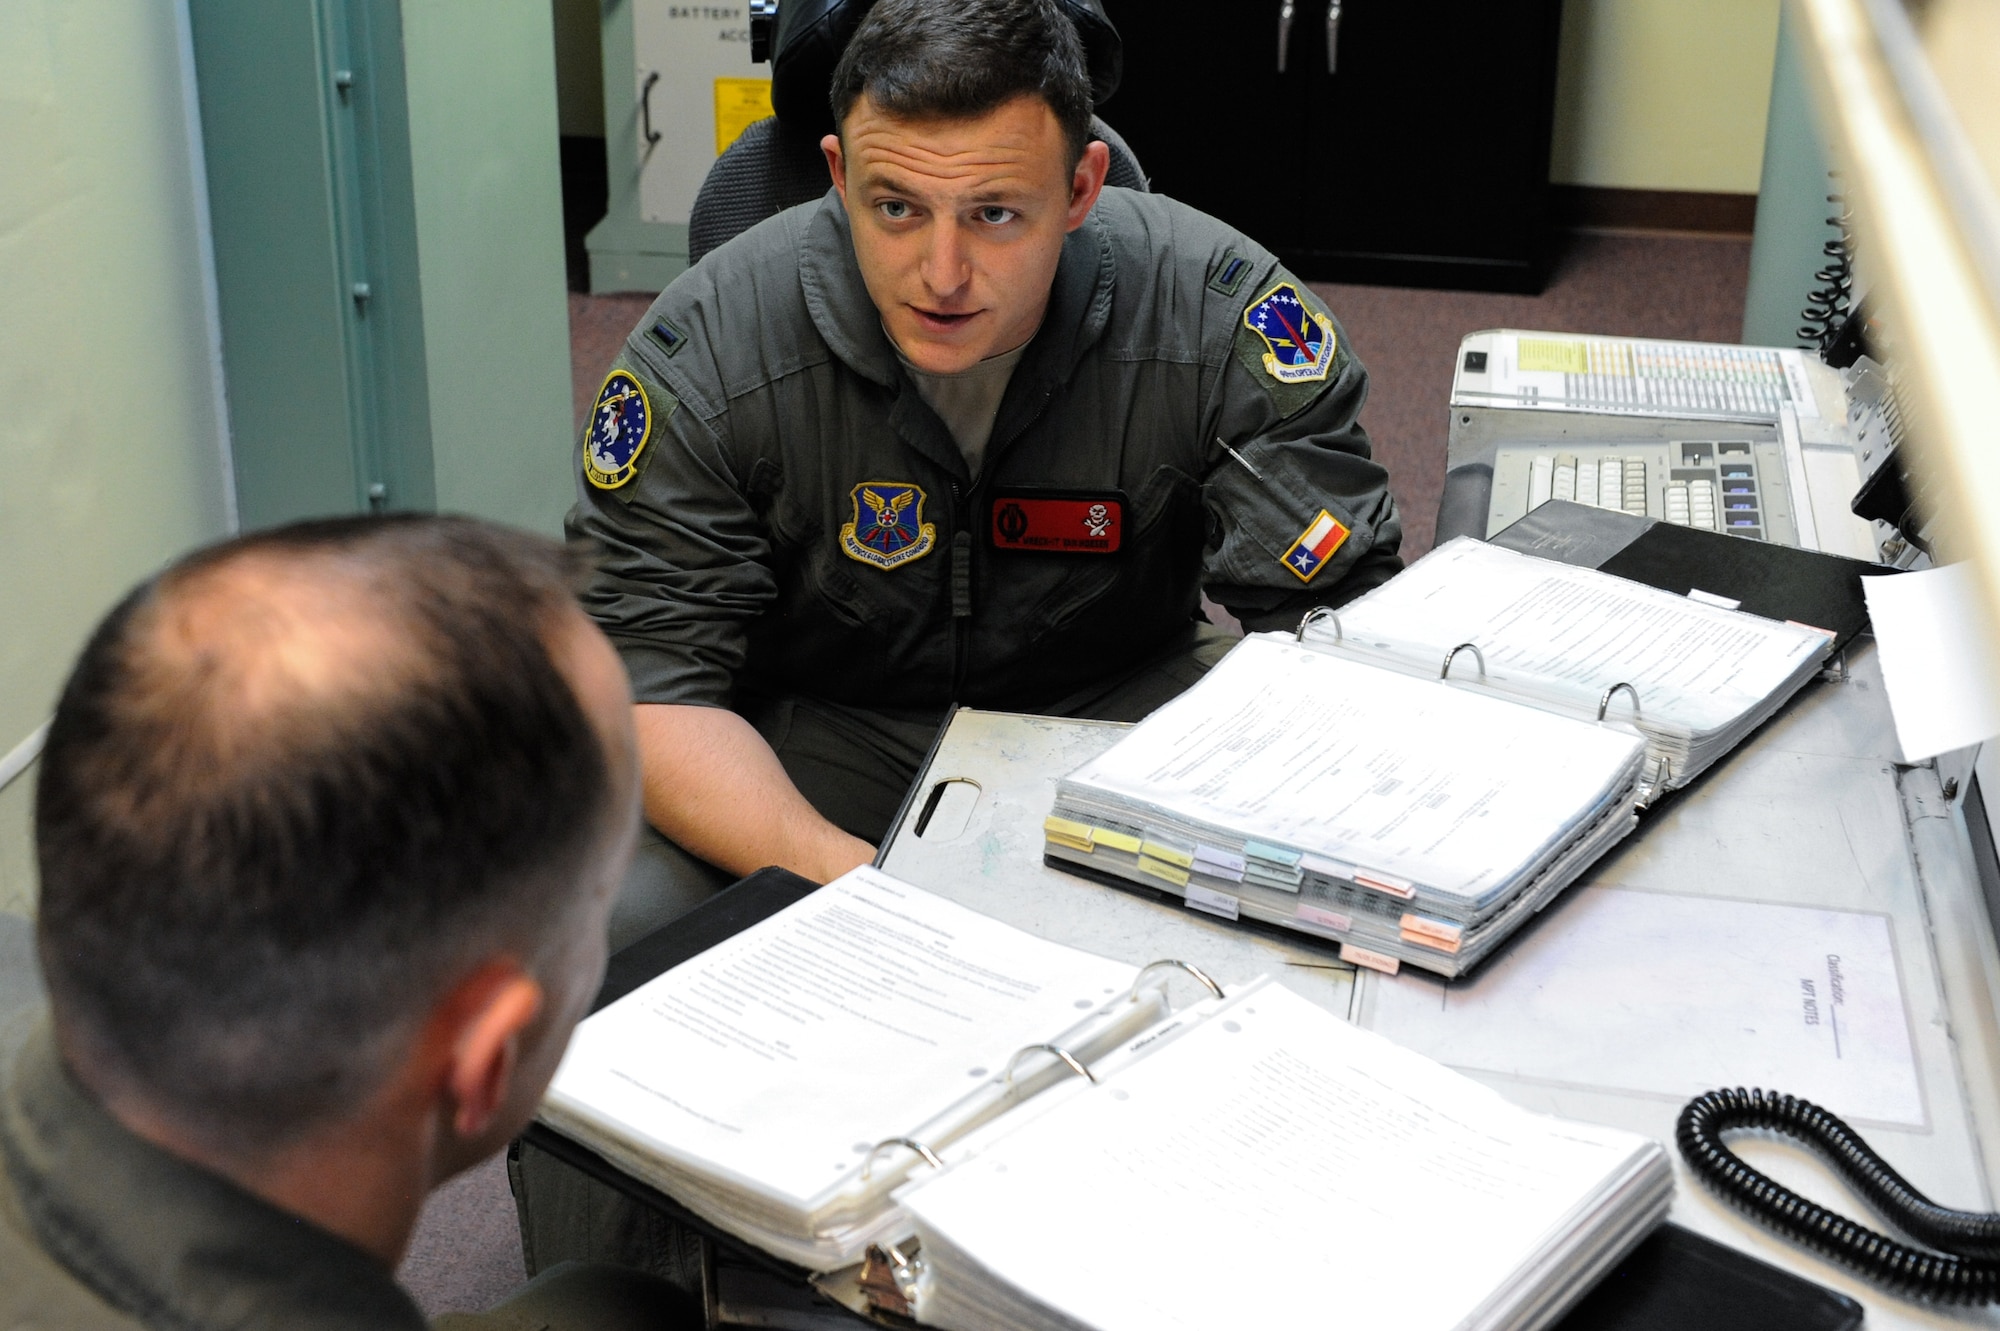 1st Lt. Austin Van Hoesen, 320th Missile Squadron assistant flight commander, debriefs maintenance actions with 1st Lt. Jedediah Simpson, 320 MS missileer, on F.E. Warren Air Force Base, Wyoming, April 25, 2019. The Air Force Association awarded Van Hoesen and Simpson the 2019 Gen. Thomas S. Power Outstanding Missile Crew Award. (U.S. Air Force photo by Joseph Coslett)